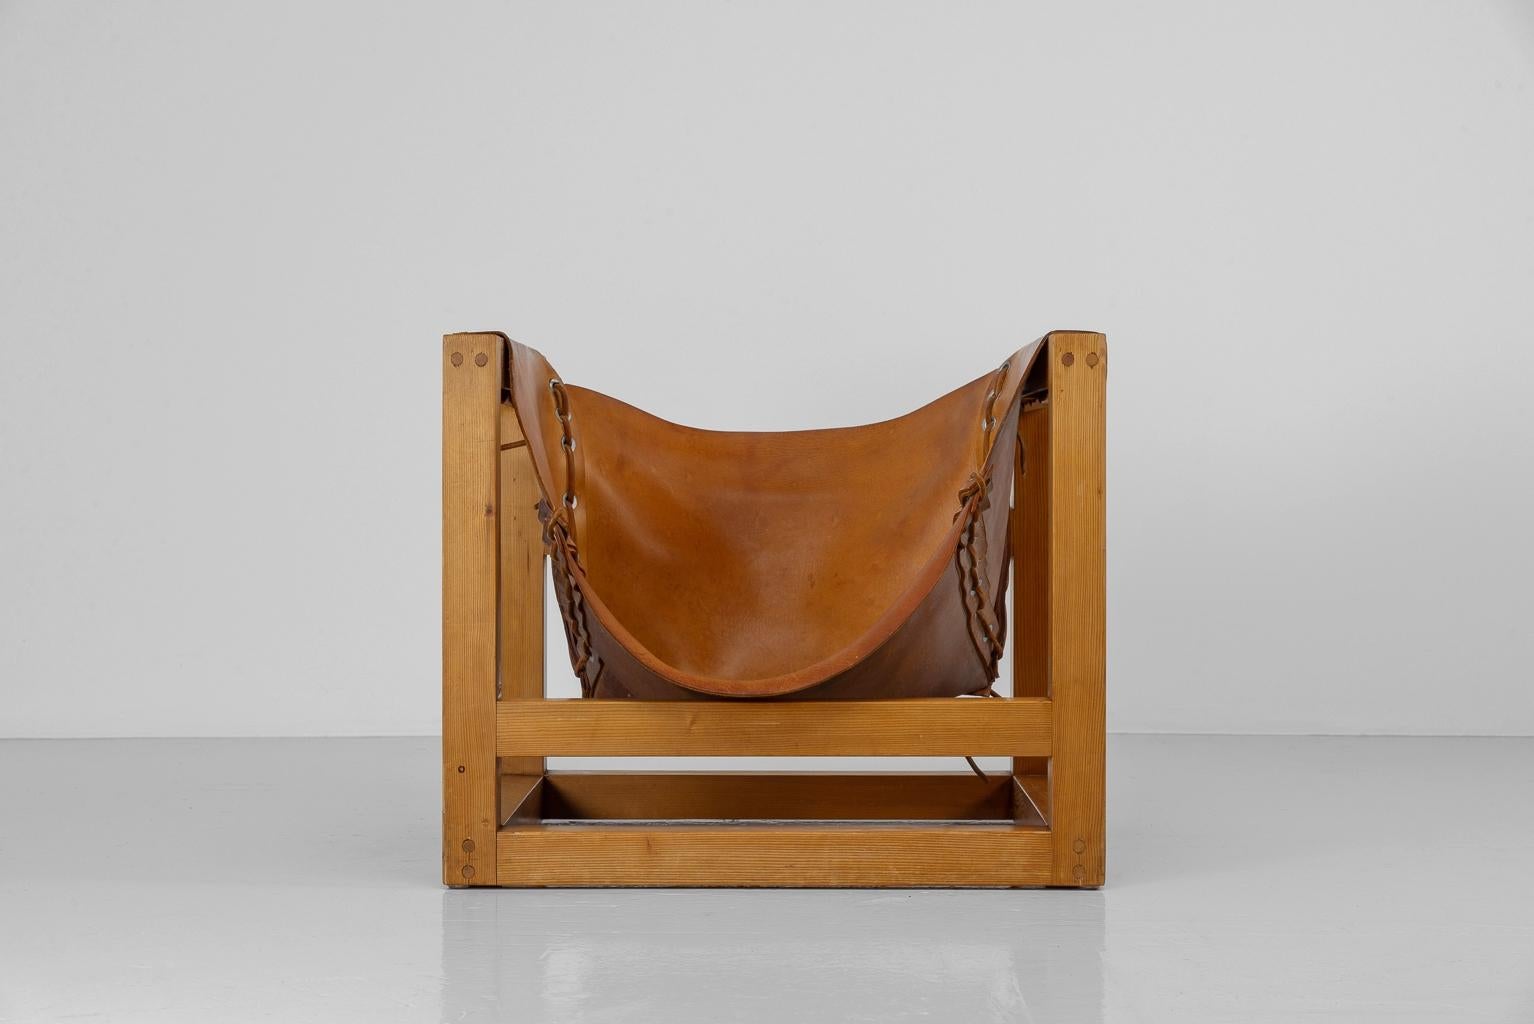 Designed by Heinz Witthoeft for Witthoeft Stuttgart in 1959, this modernist Tail 4 armchair, showcases careful craftsmanship synonymous with cubic architectural design due to its solid pine frame and intricate wooden joints. Wrapped in cognac